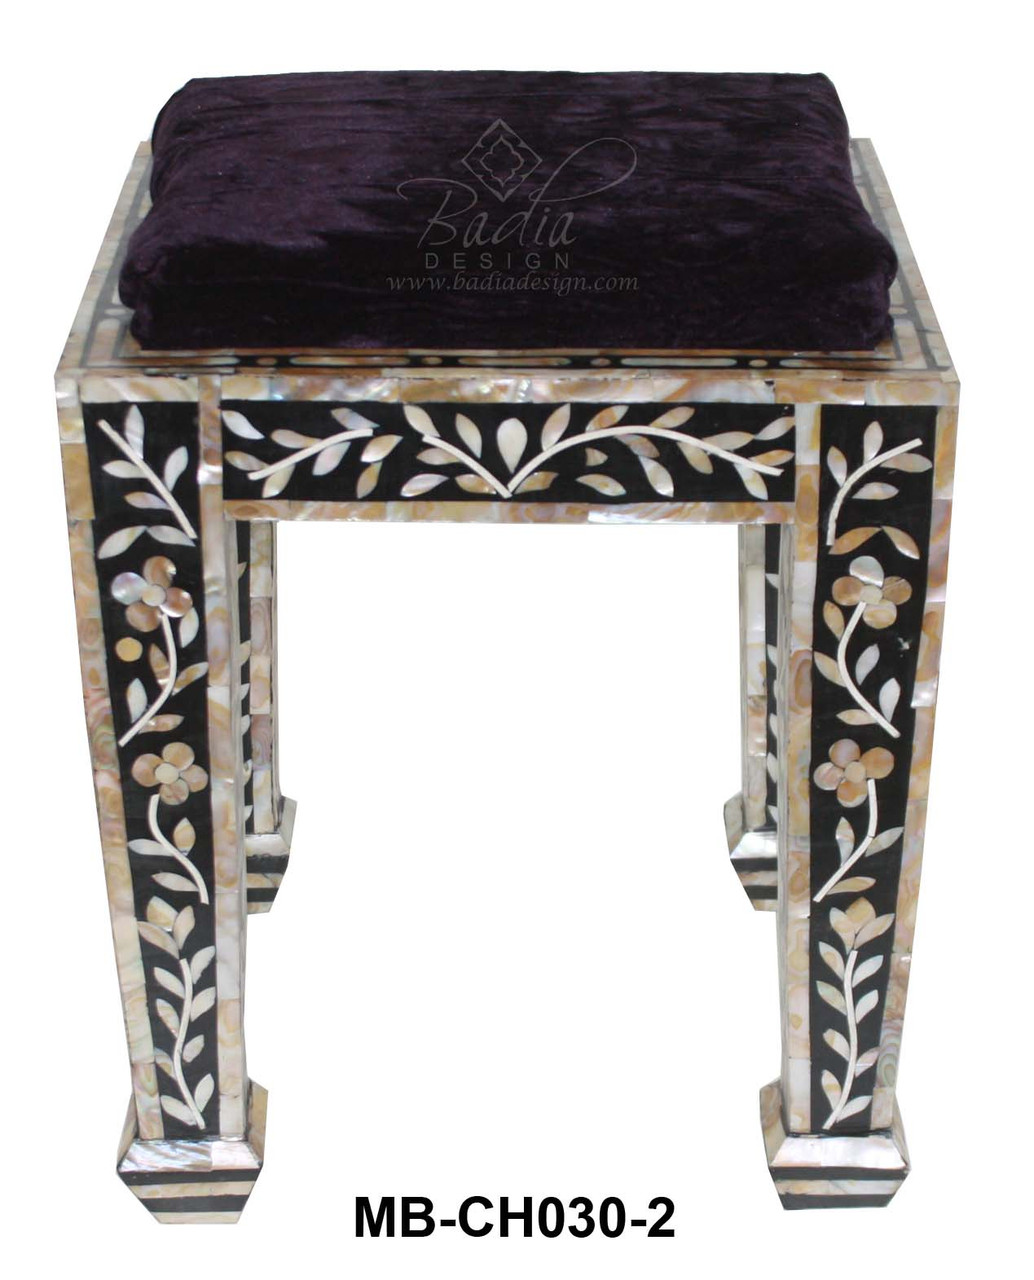 Small Mother of Pearl Inlay Ottoman - MB-CH030